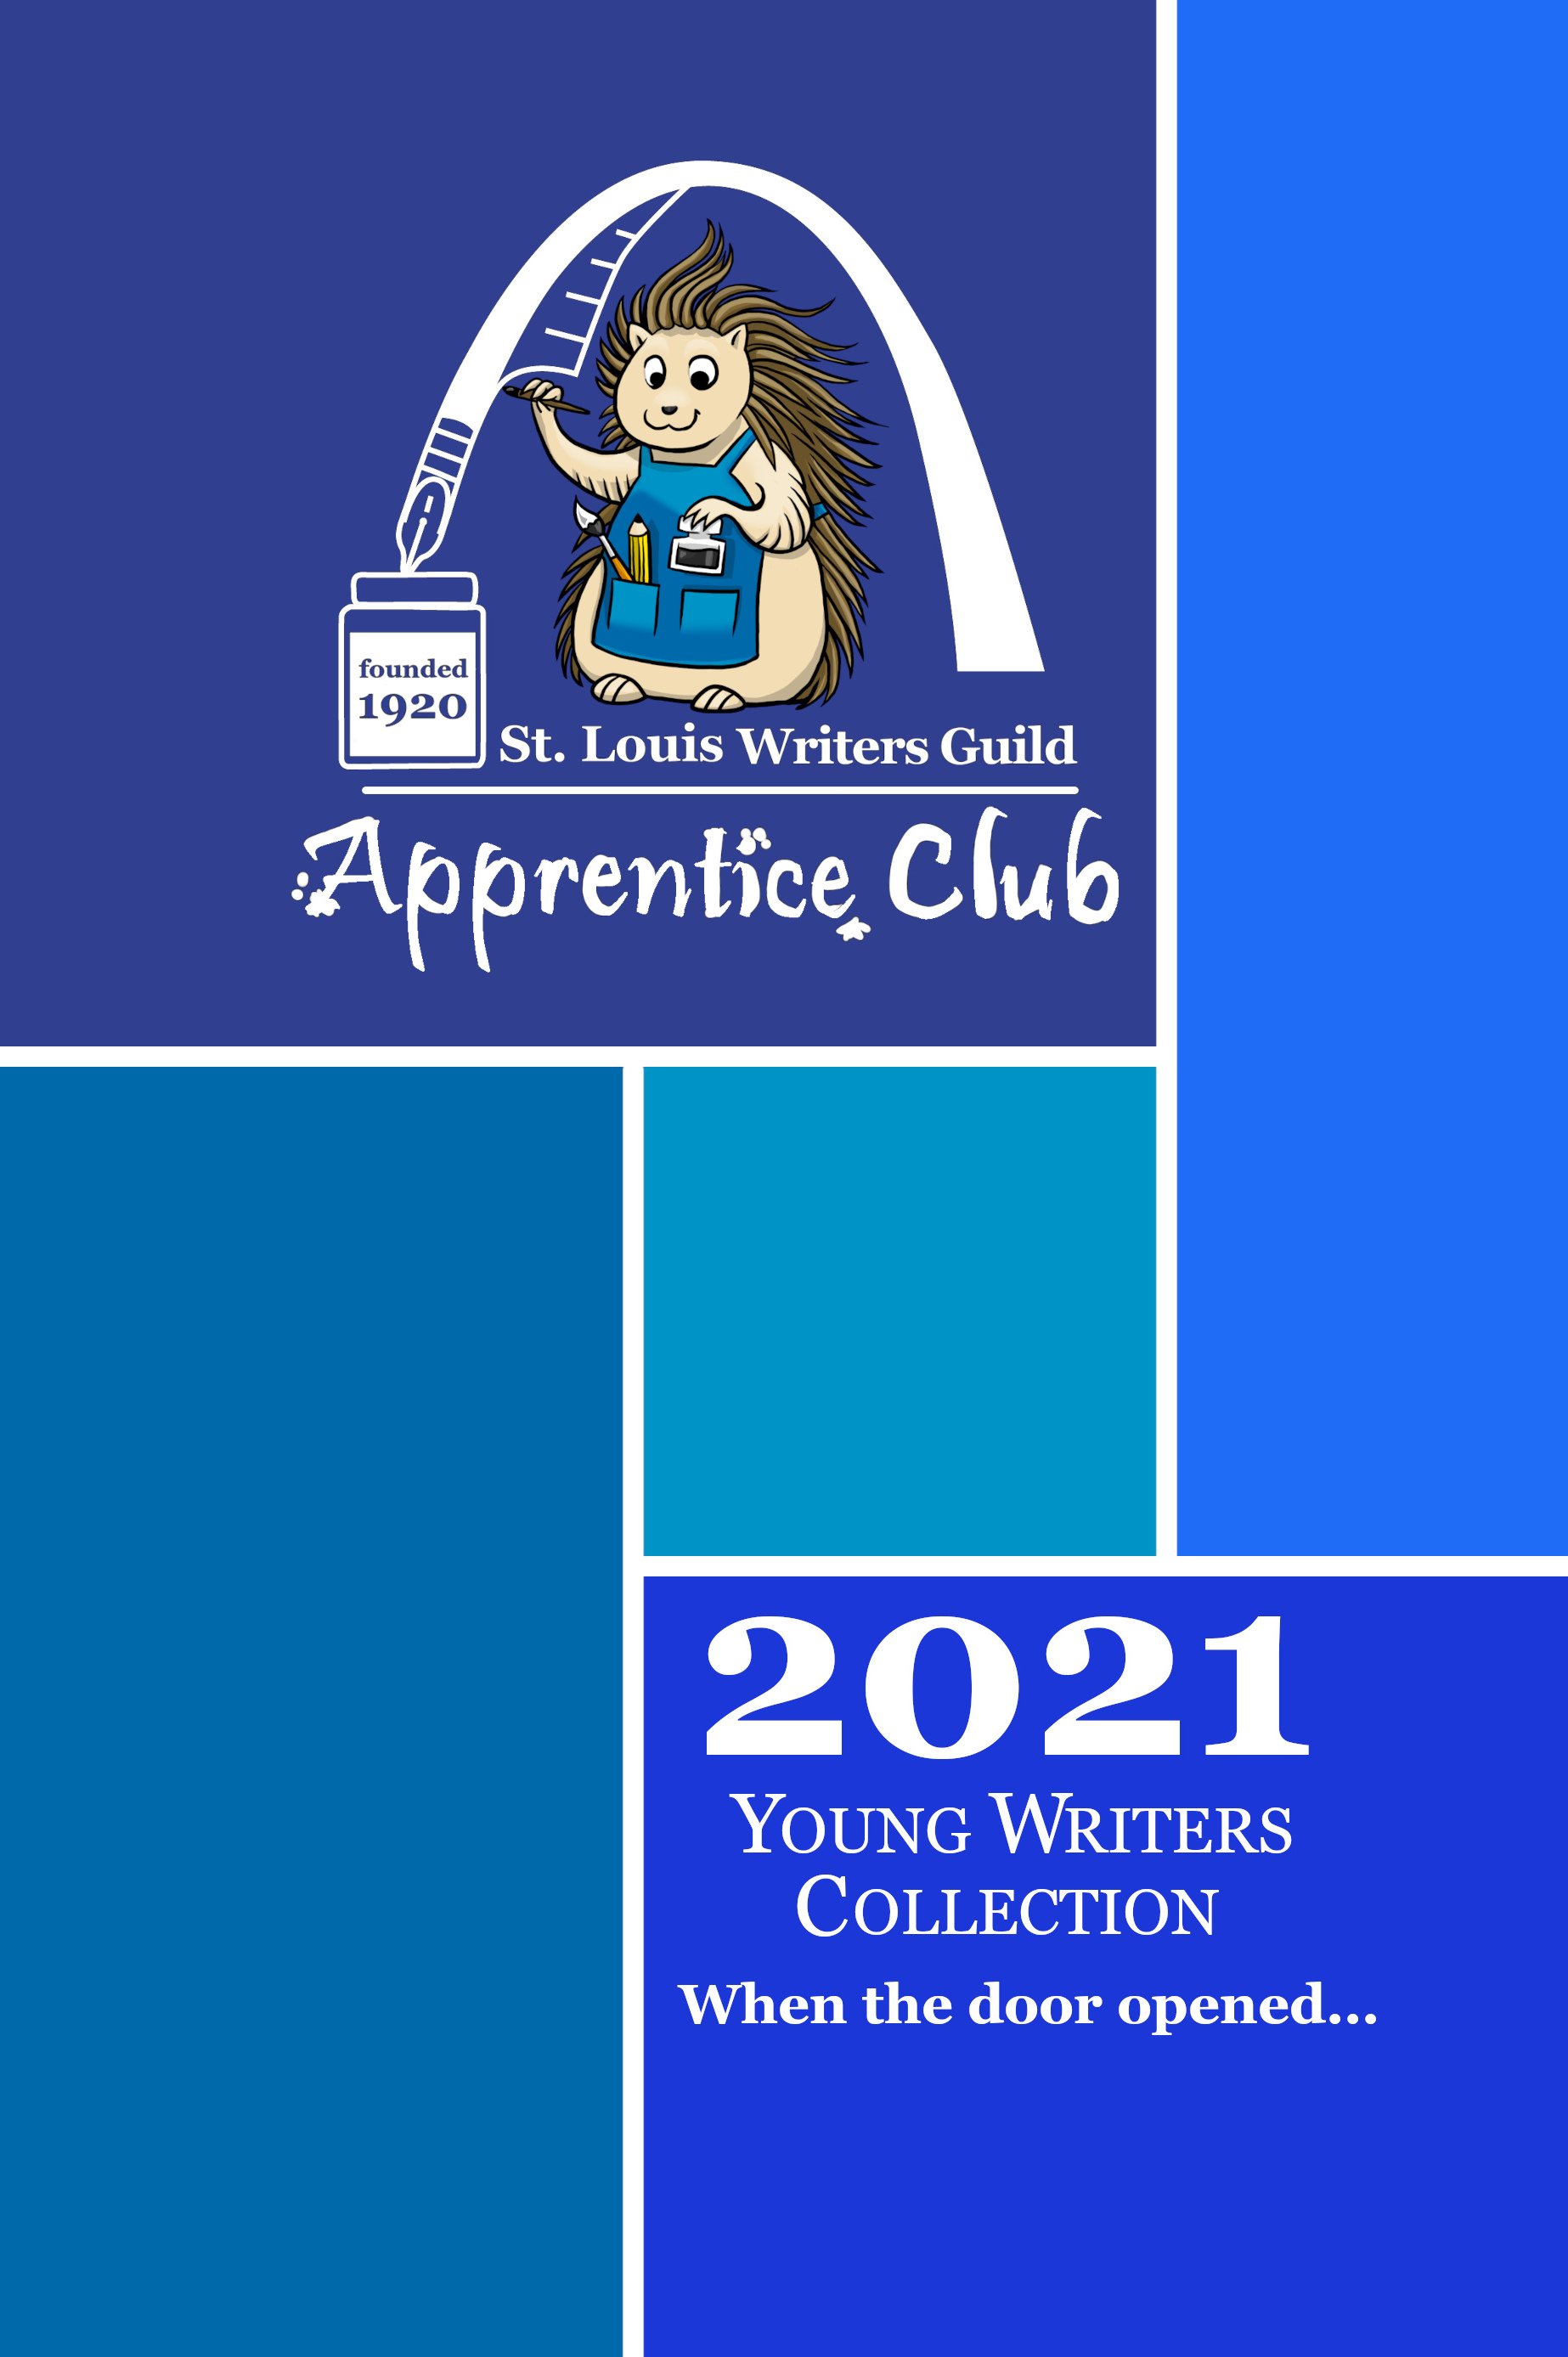 YWACollectionCover2021-FrontCover.jpg